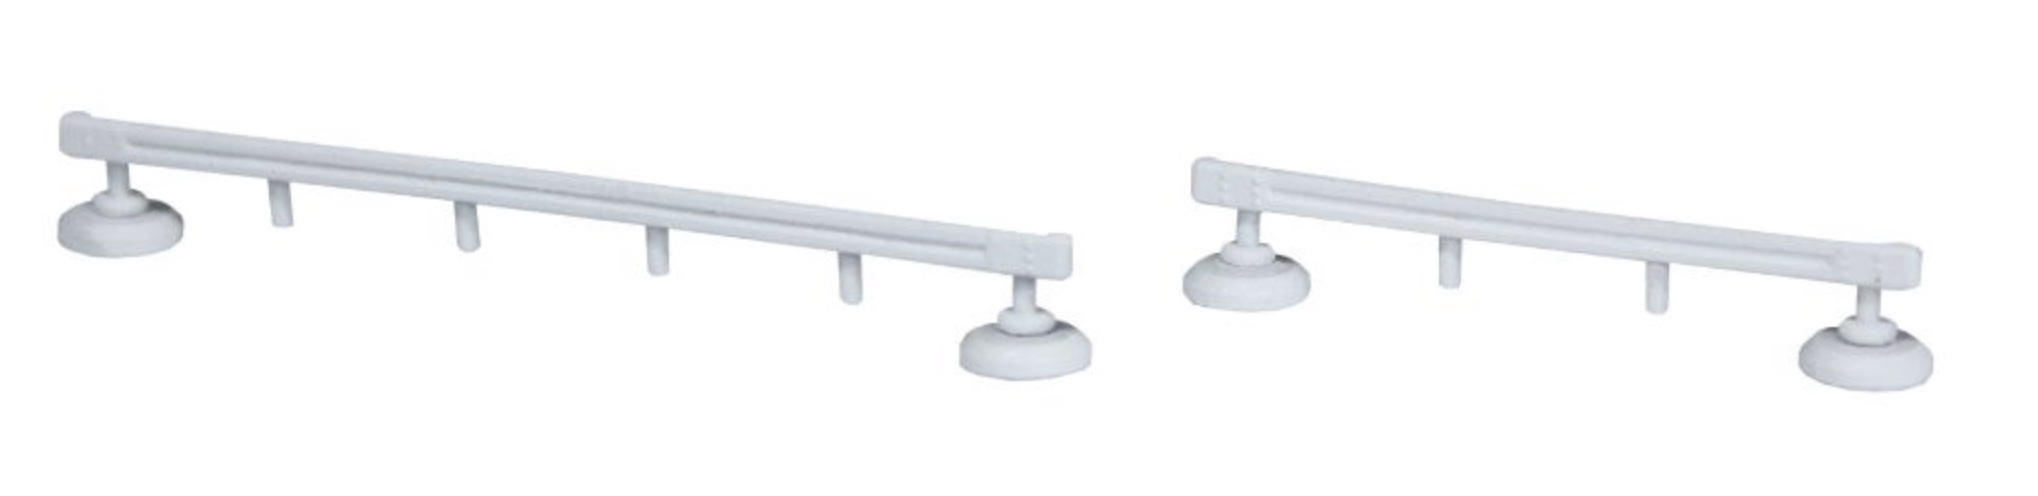 Z Scale - Rokuhan - S060-1 - Accessories, Scenery, Guardrail - Undecorated